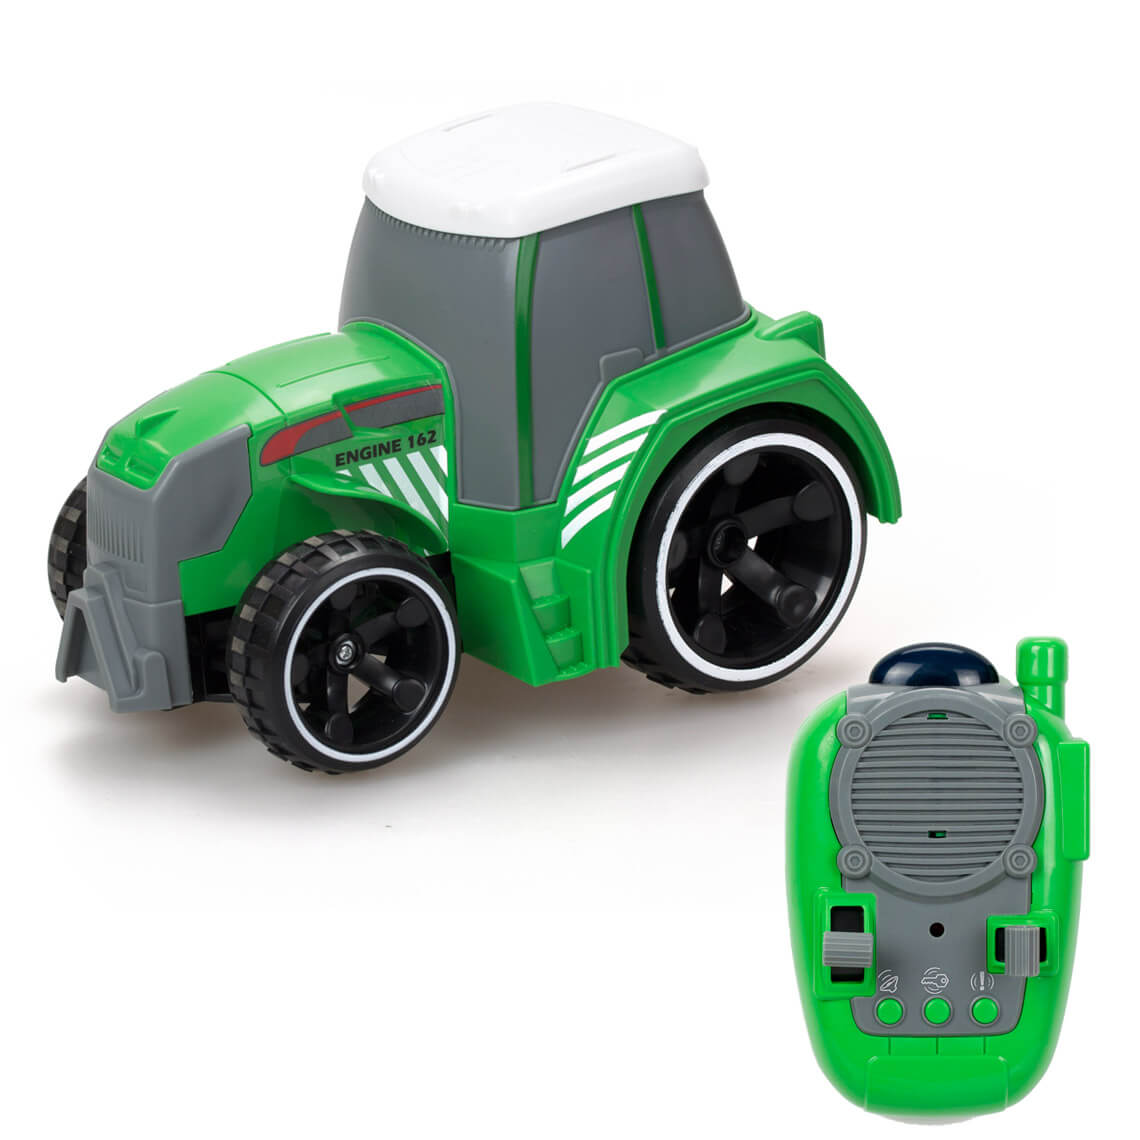 TRACTOR